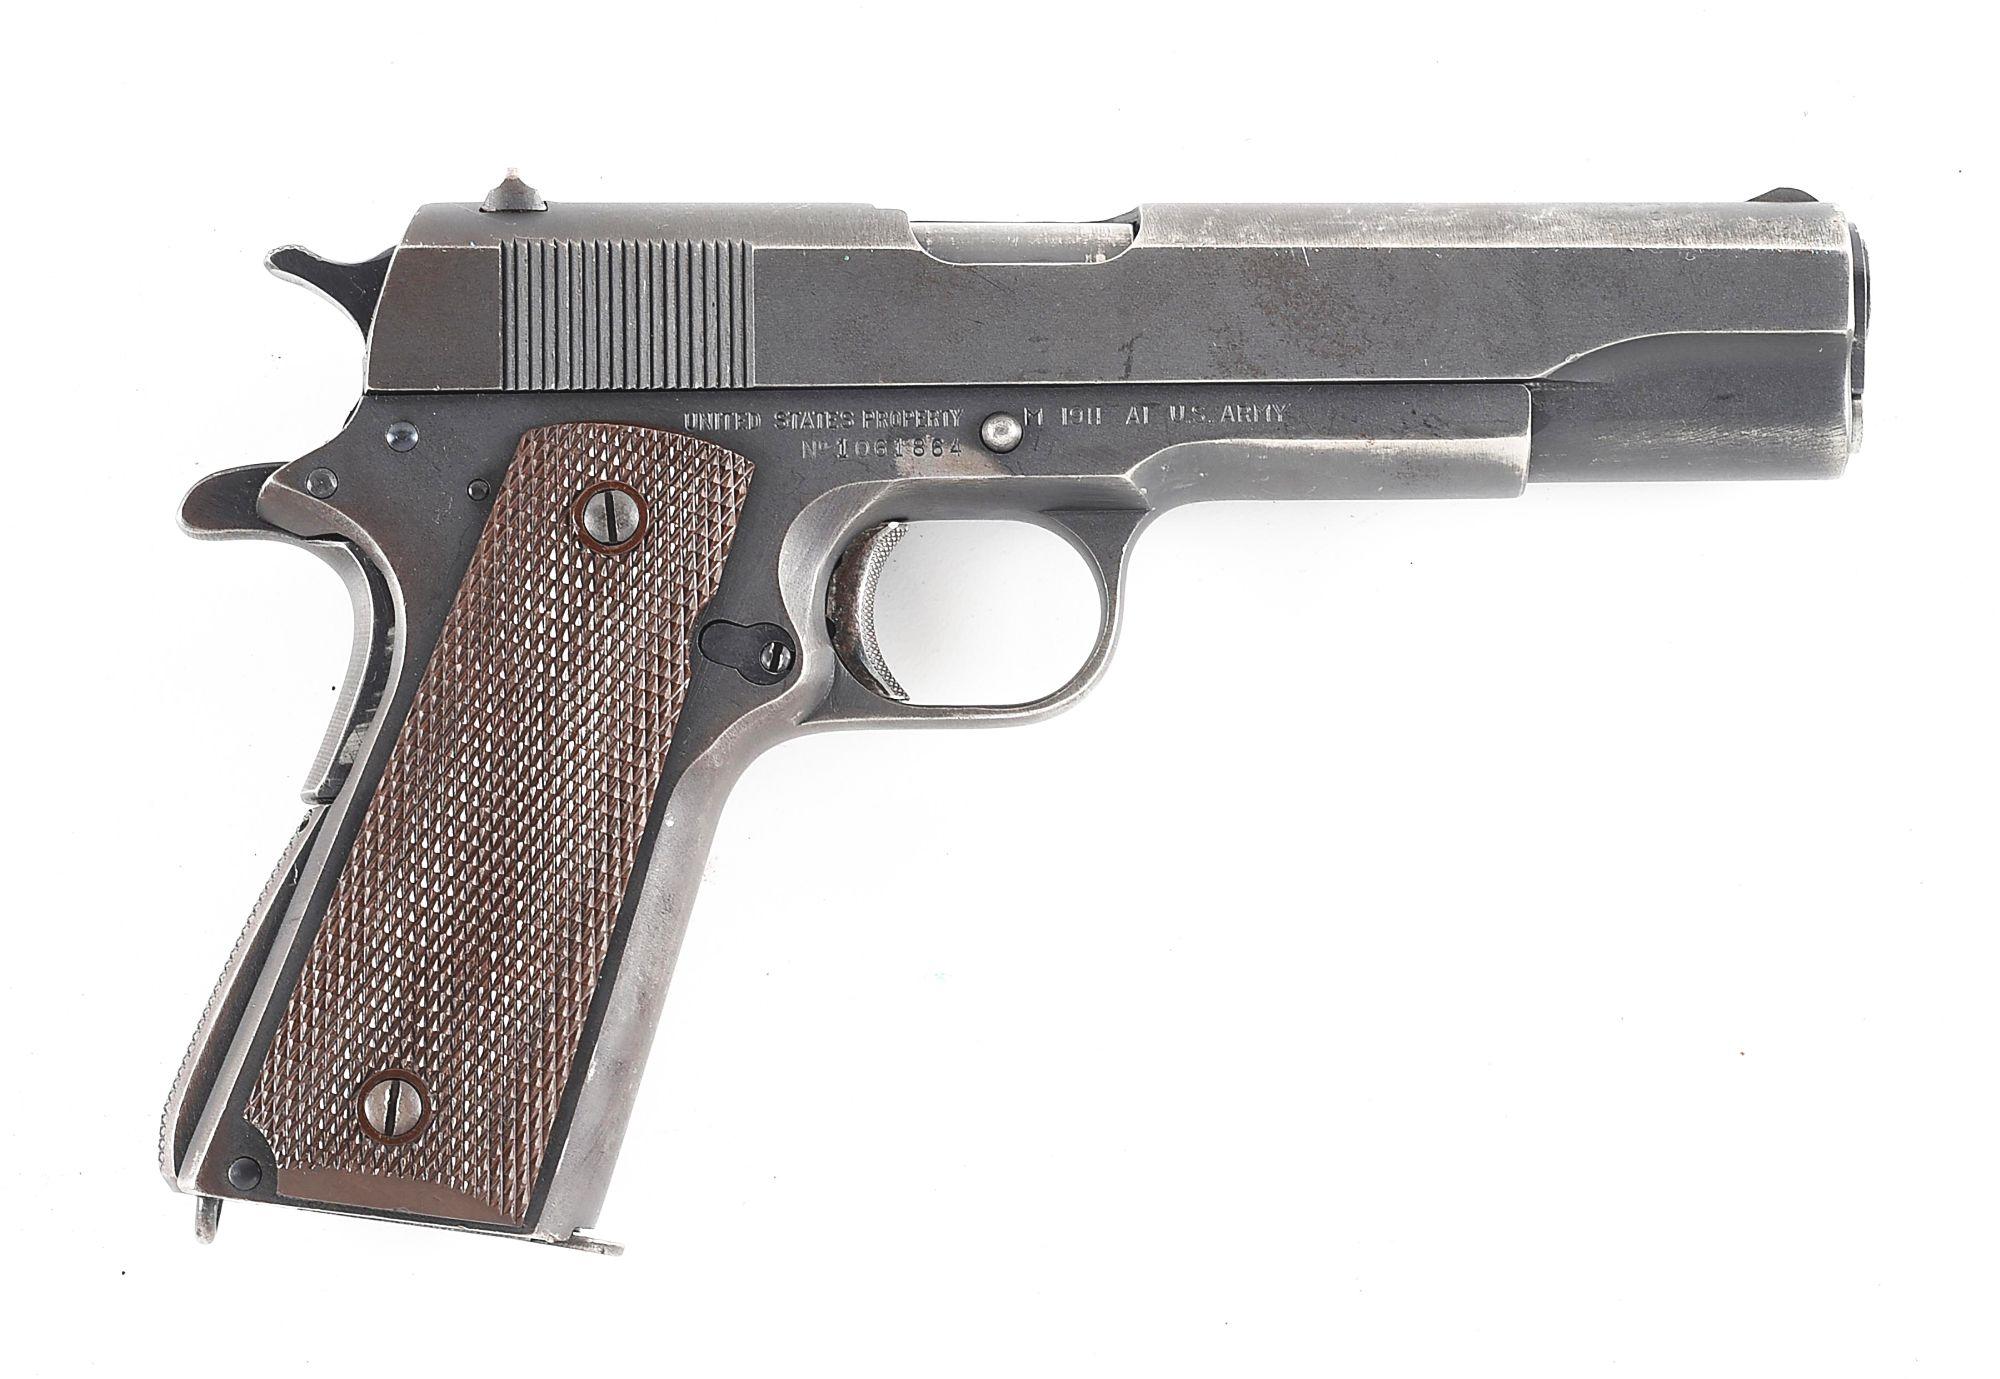 (C) UNION SWITCH AND SIGNAL M1911A1 SEMI-AUTOMATIC PISTOL WITH 1944 DATED BOYT HOLSTER.